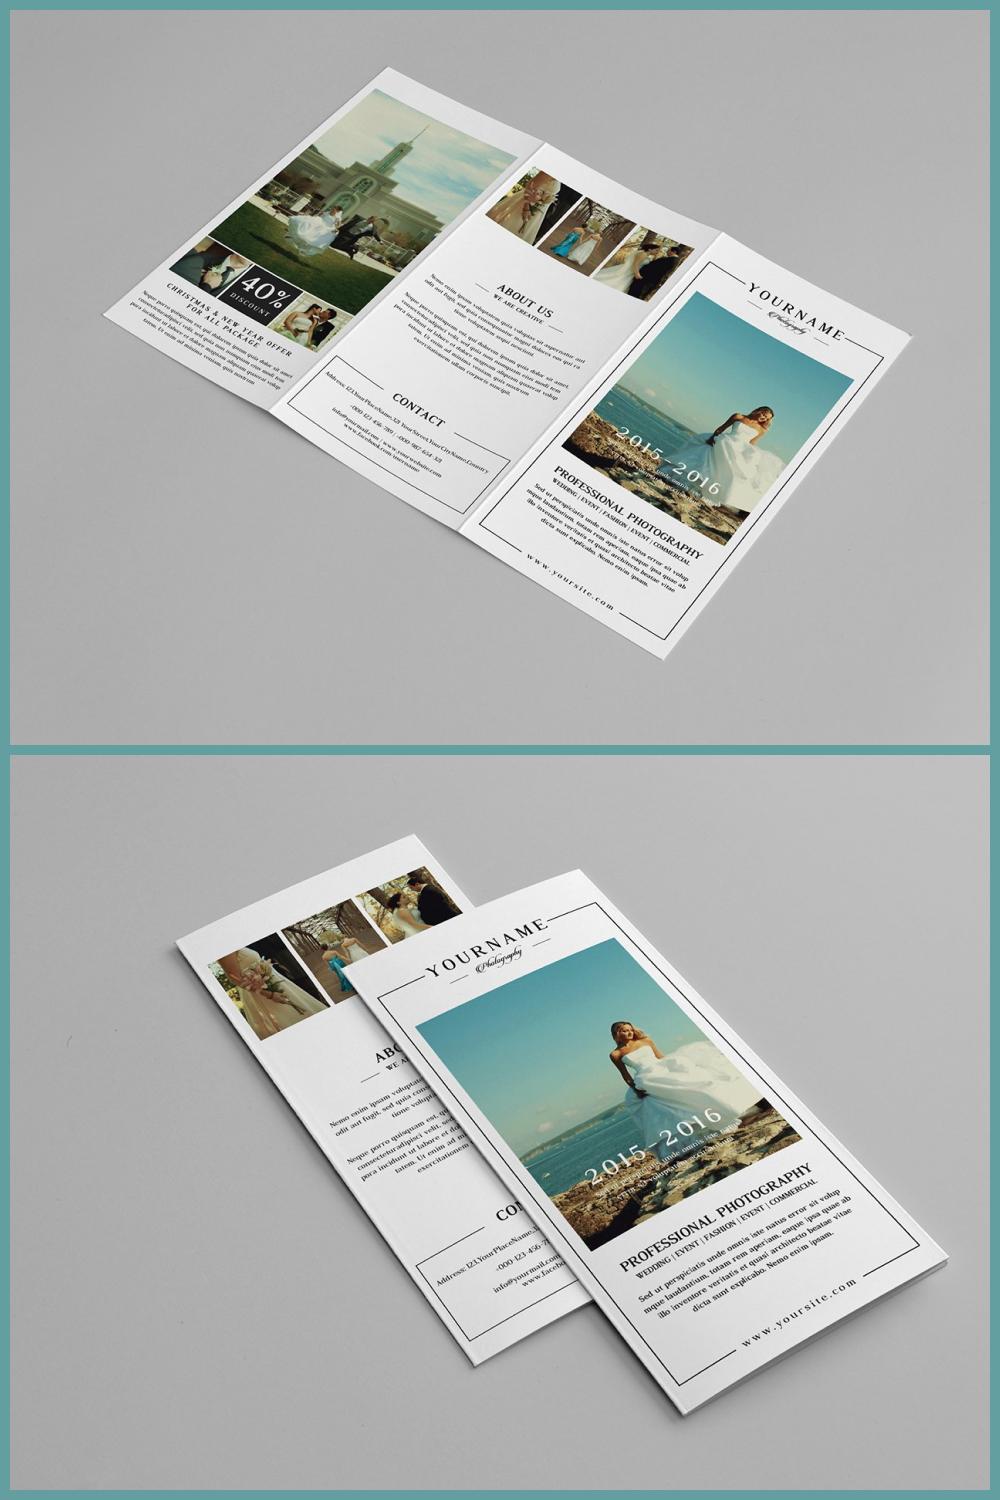 Wedding photography trifold brochure of pinterst.